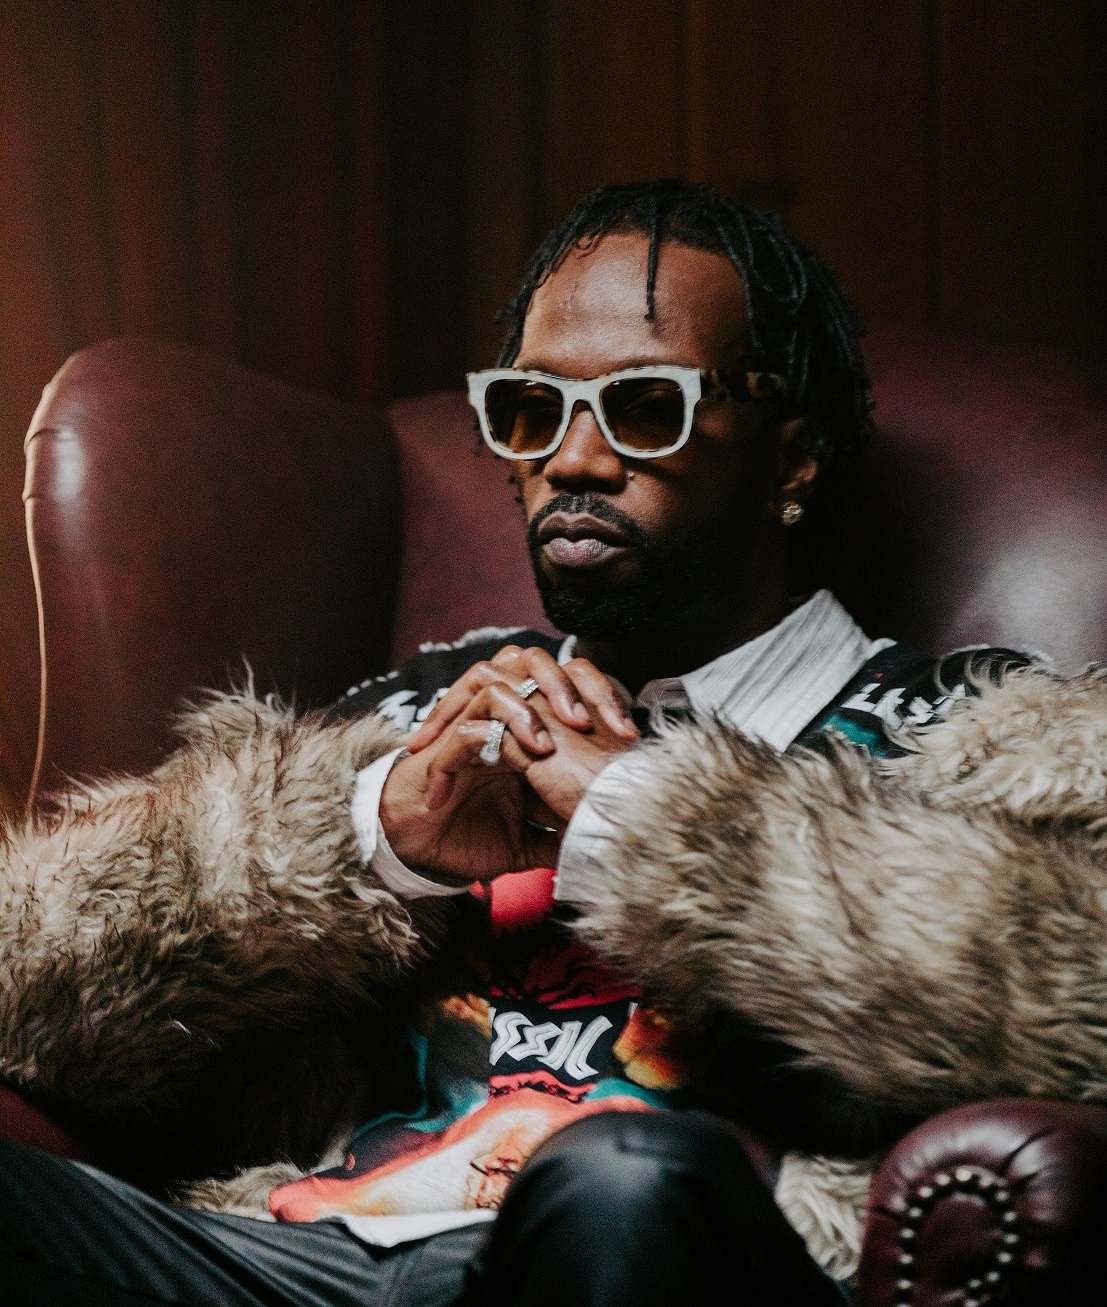 Juicy J Announces ‘The Hustle Still Continues’ Album + Drops ‘Take It’ Video feat. Lord Infamous & Rico Nasty